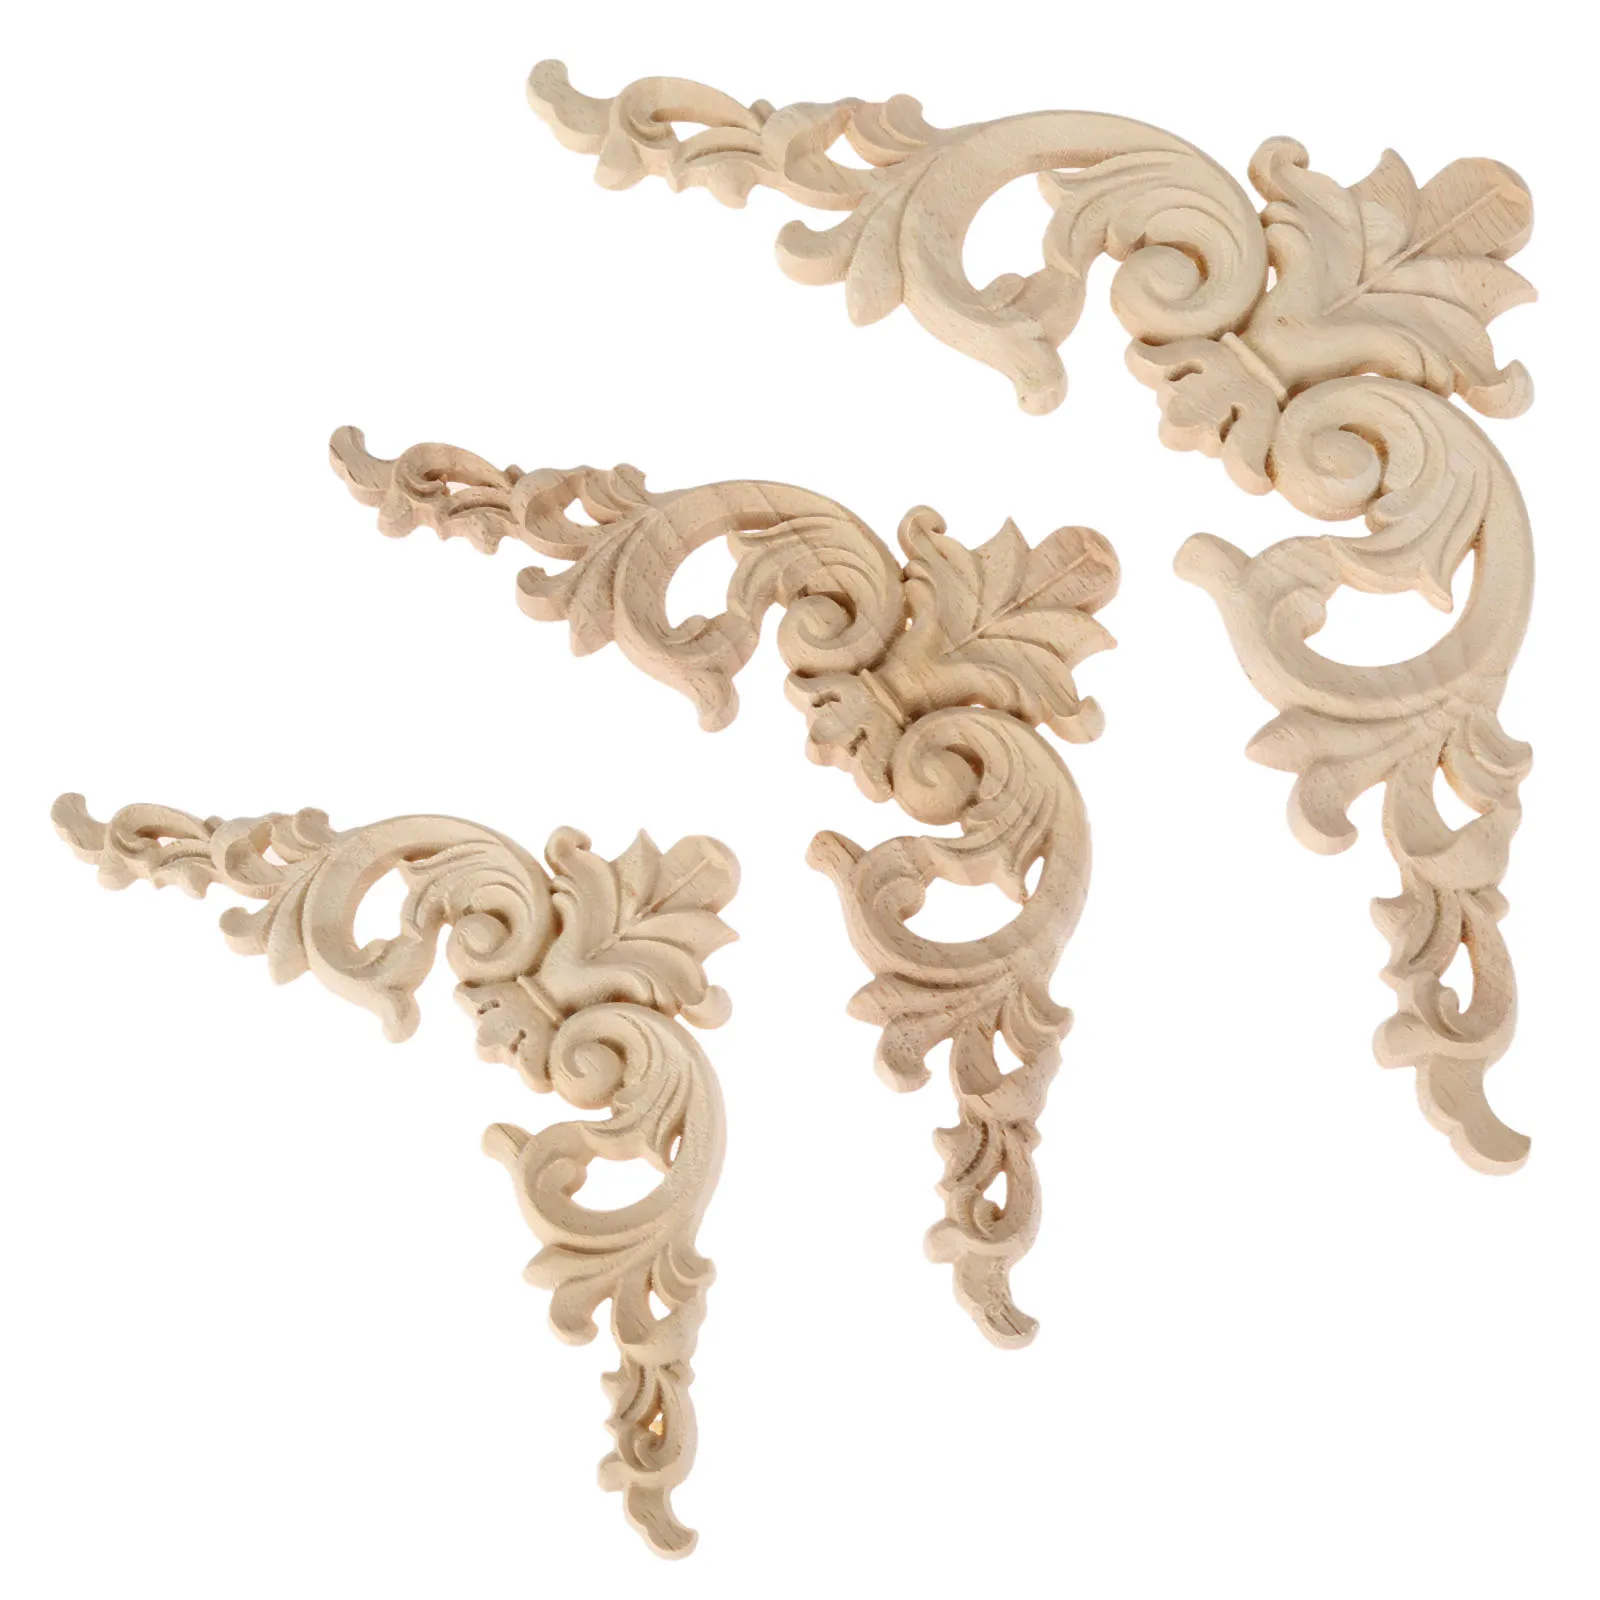 

1Pc 12/15/20cm Unpainted Wooden Carved Decal Corner Woodcarving Onlay Applique Flower Furniture Cabinet Doors Mirror Decoration